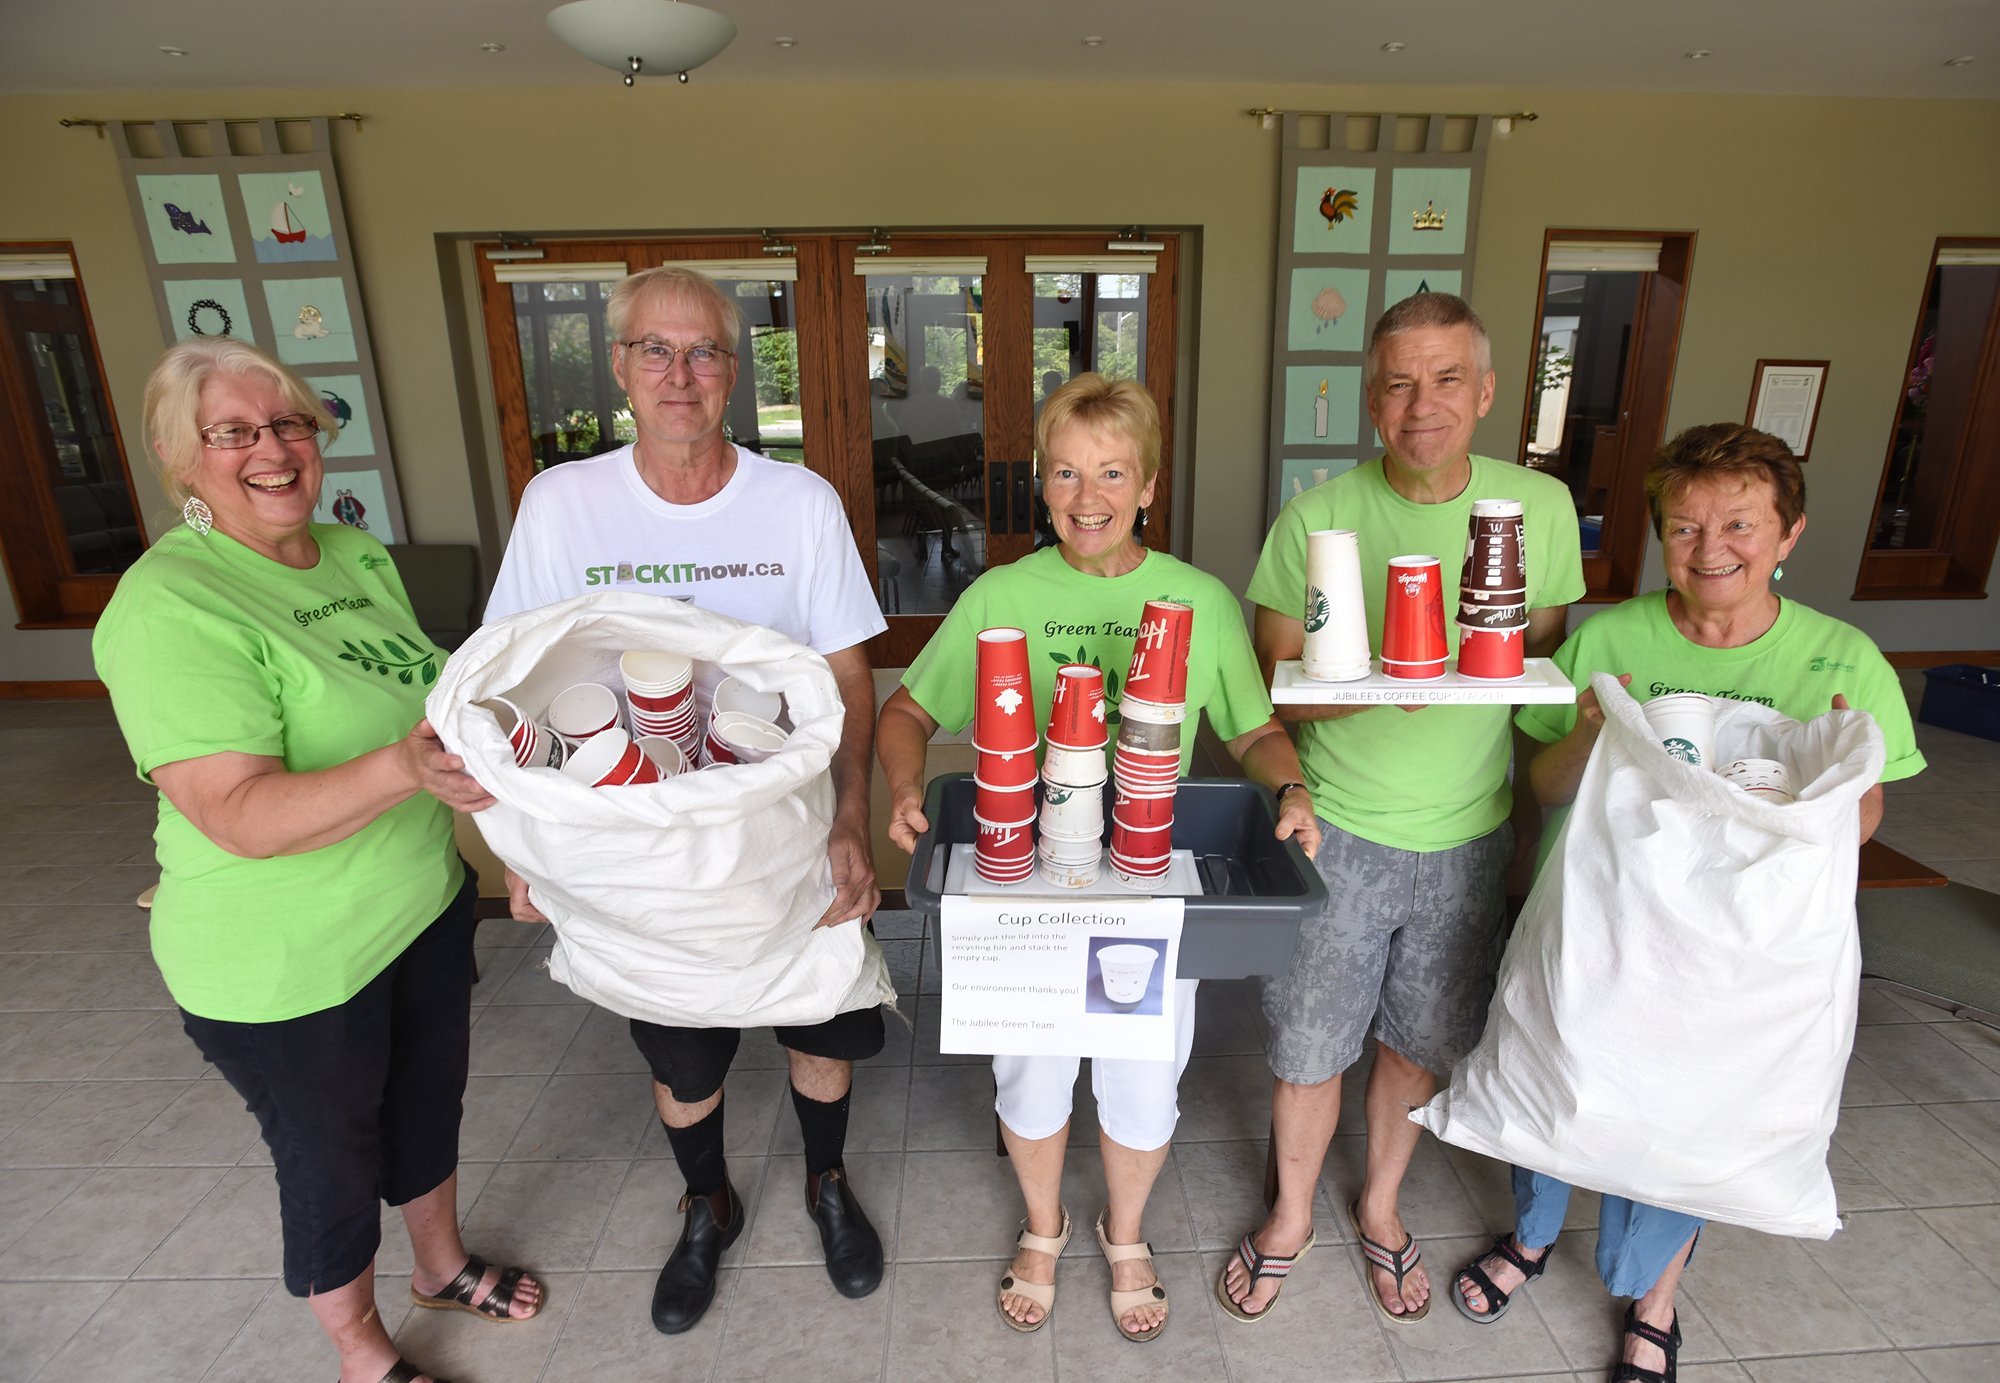 Jubilee United Church members Pat Lansche, left, Valerie Winters, Drew Winters and Judy Wells are working with North York-based Carbon Neutral Shredding owner Ian Chandler, white shirt, to dispose of recyclable coffee cups.